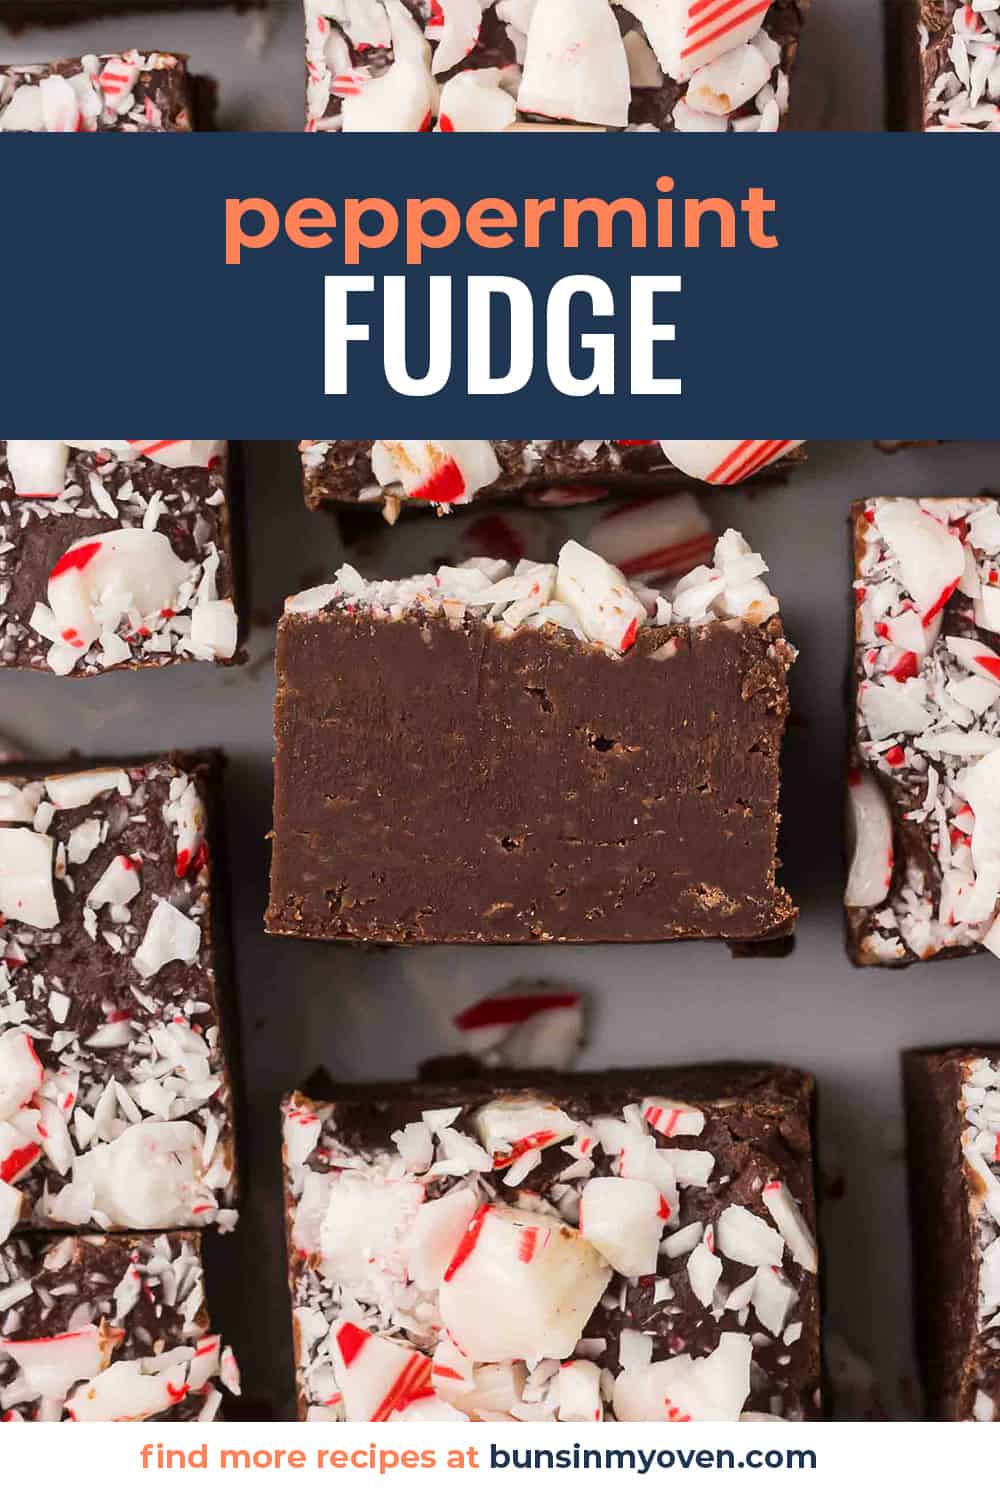 Pieces of peppermint fudge arranged on counter.